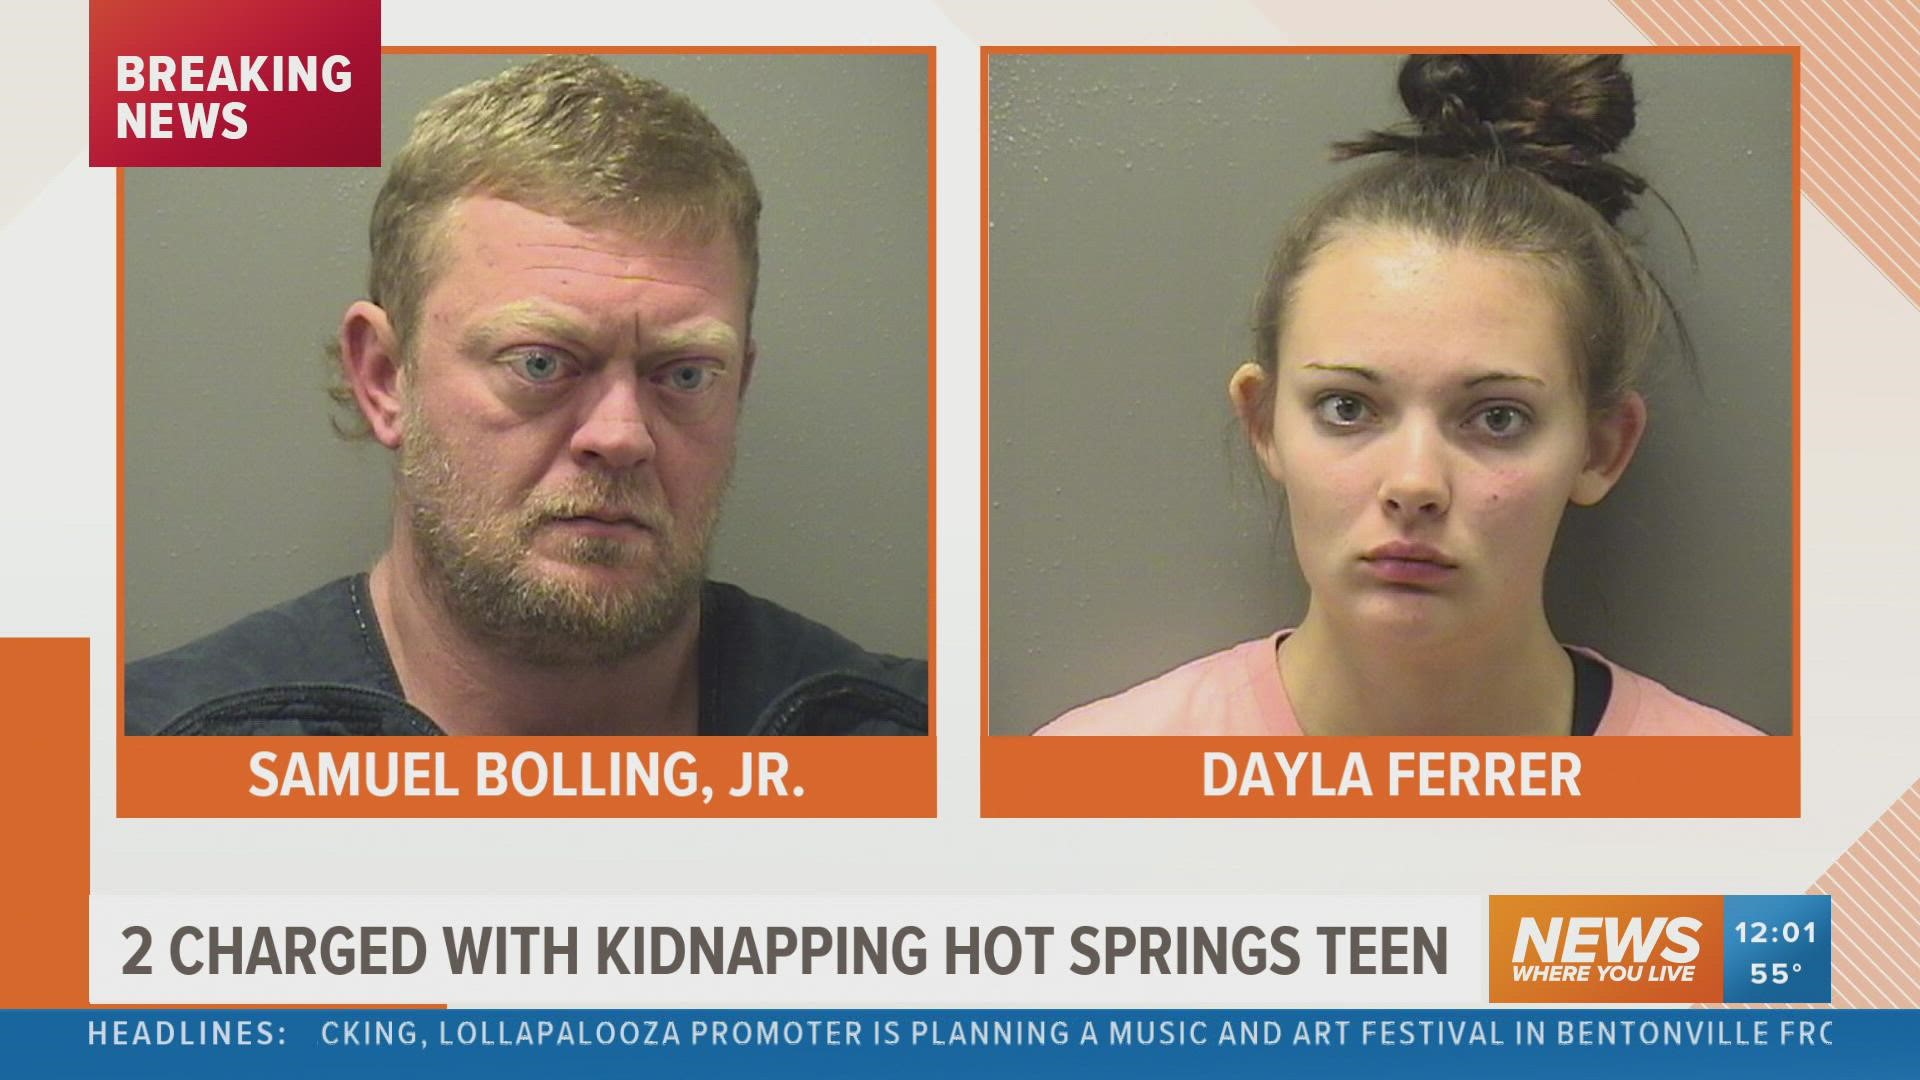 An Arkansas man and Tennessee teen have been charged in connection with the alleged kidnapping of a 17-year-old Hot Springs girl.